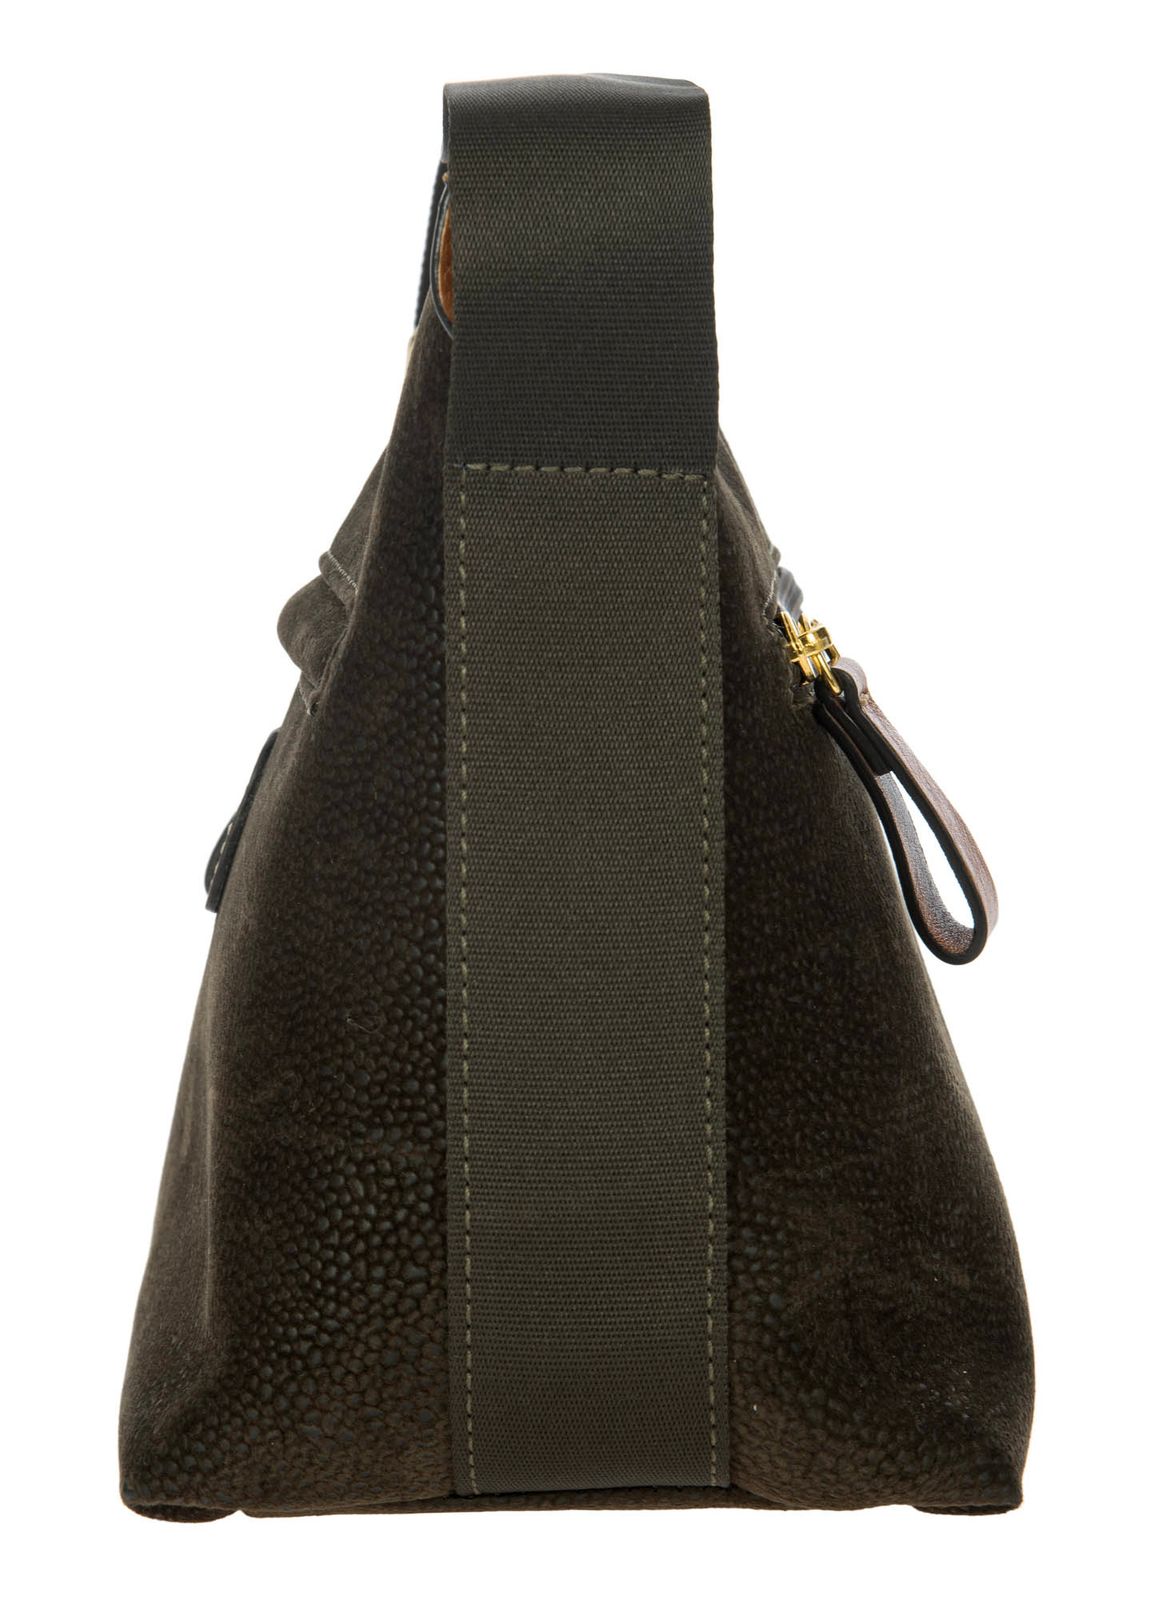 Brics Small Shoulder Bag - Martina | Olive - iBags - Luggage & Leather Bags